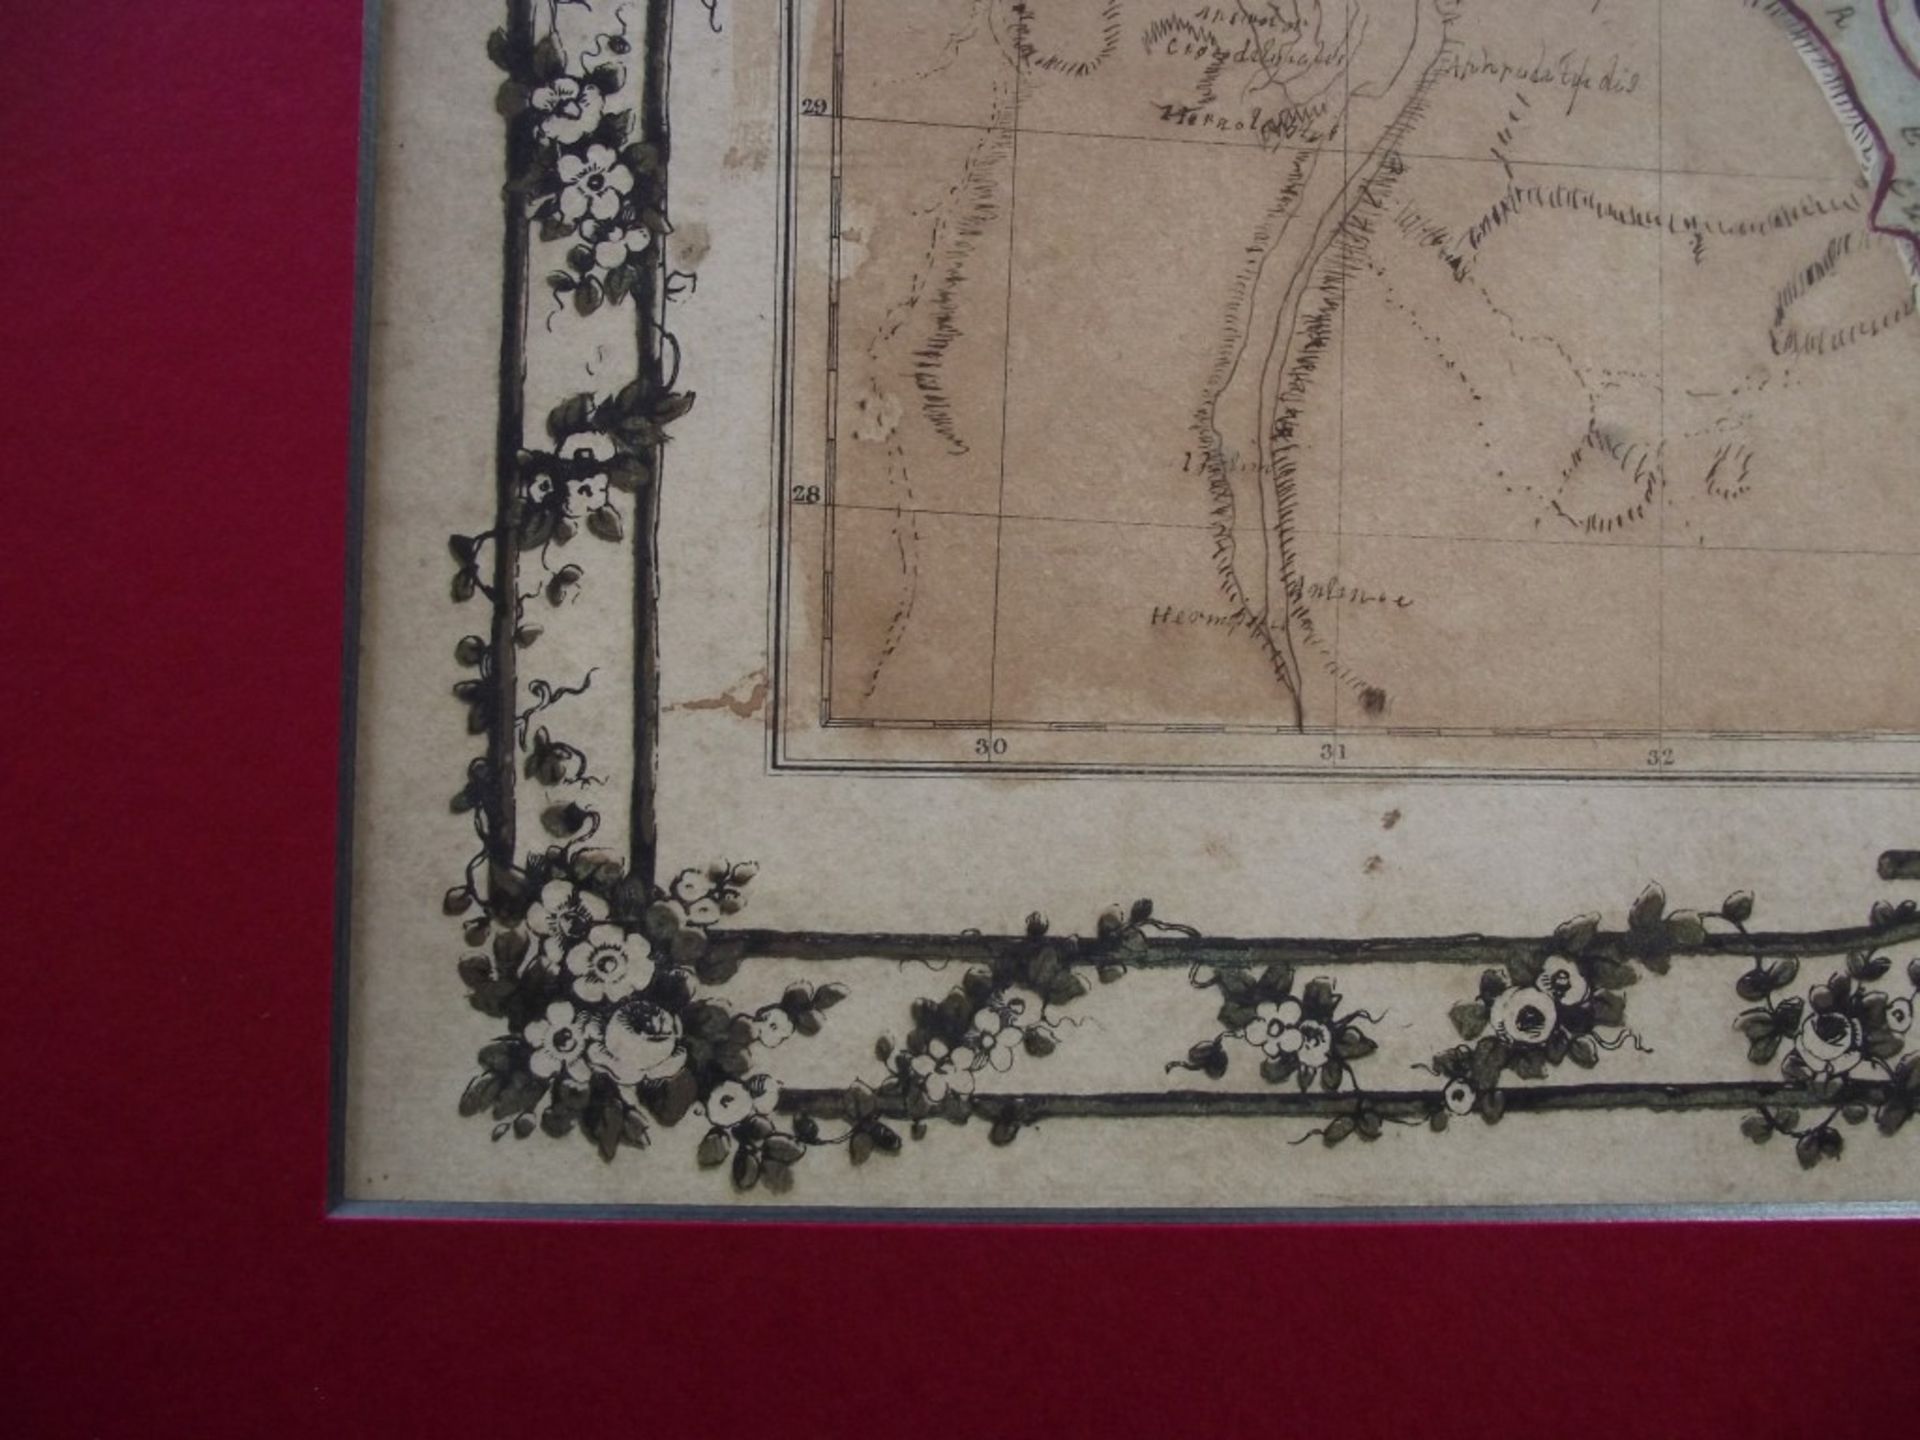 2 x 19th Century Hand Drawn Maps - Signed & Dated By Jane Edwards 1860 - Image 20 of 34